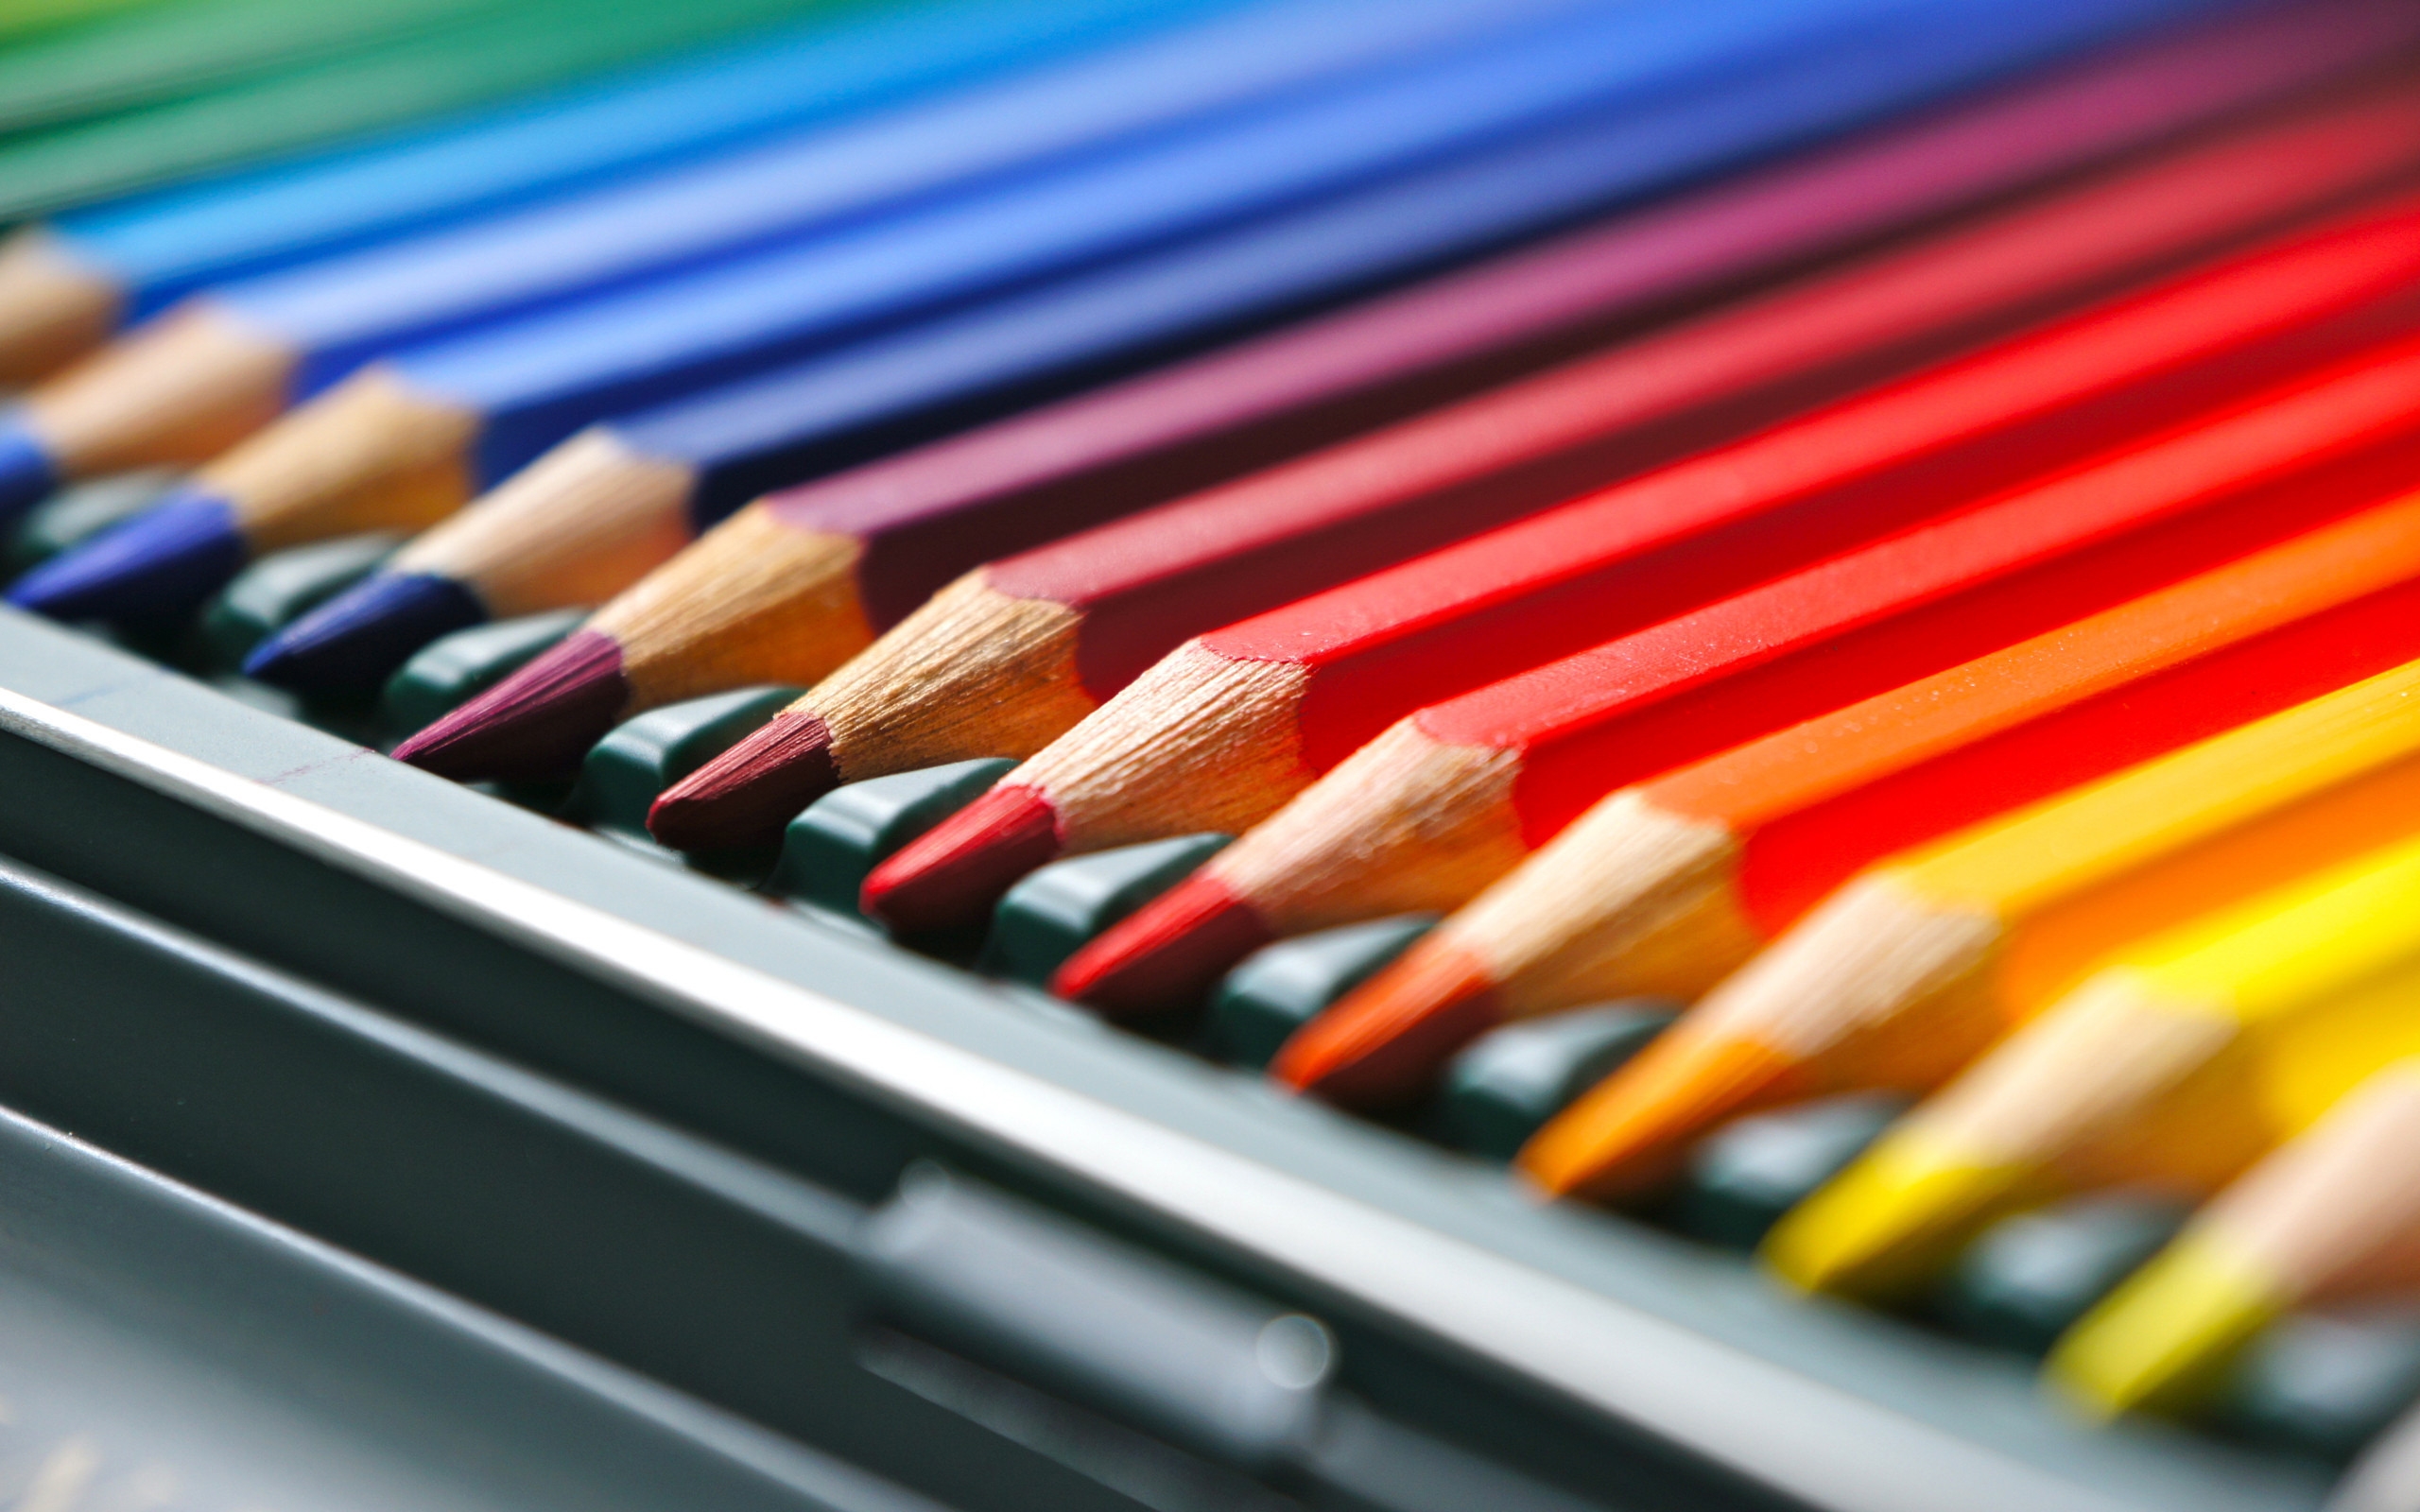 Crayons for 2560 x 1600 widescreen resolution